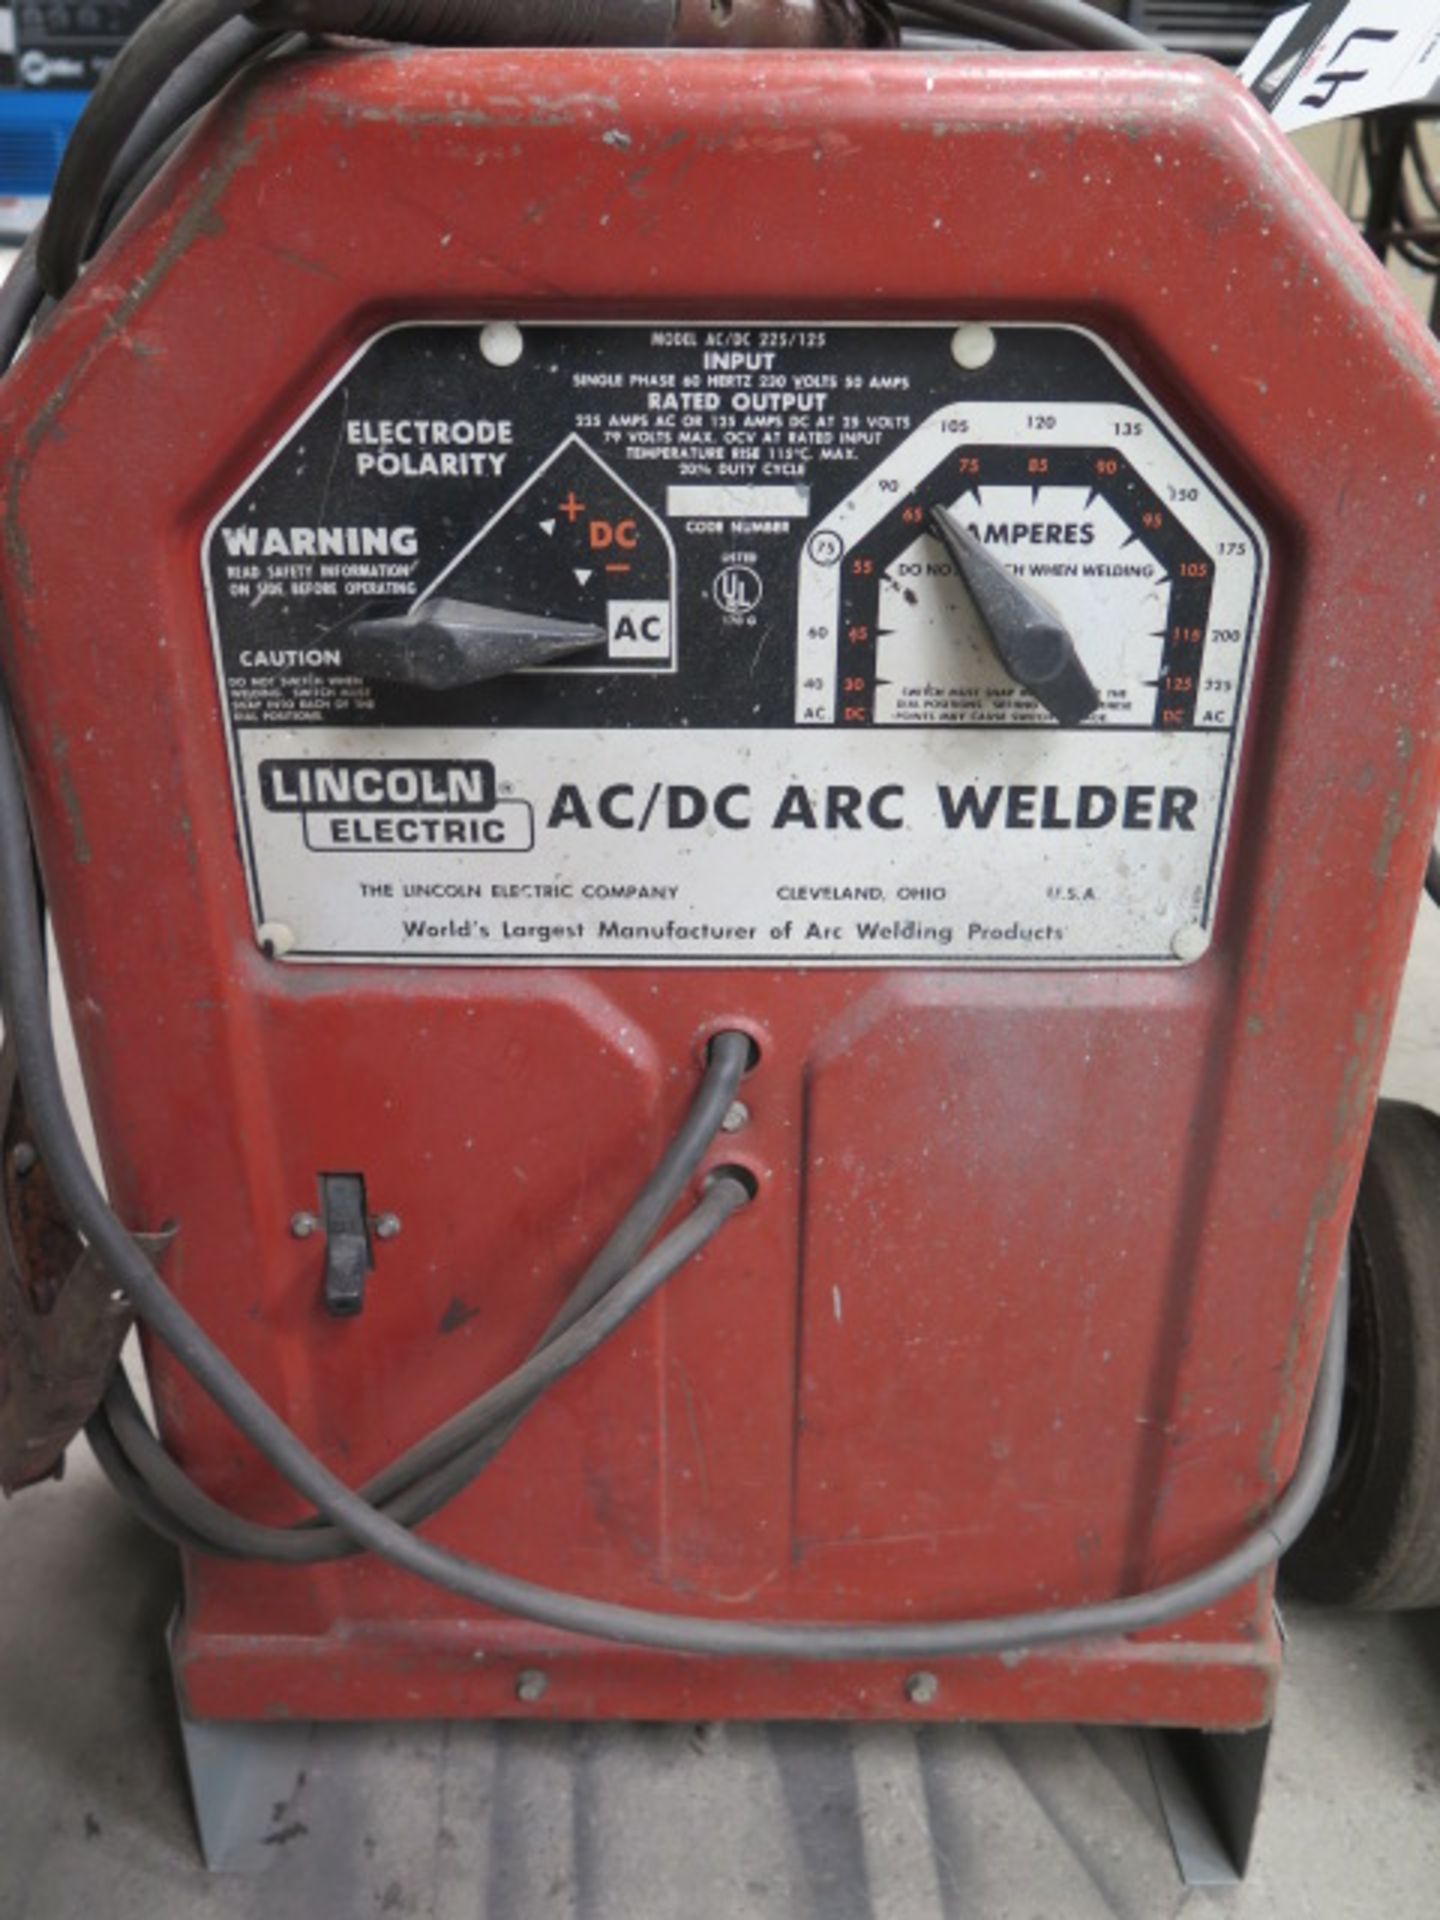 Lincoln 225 Amp AC/DC Arc Welding Power Source - Image 2 of 3